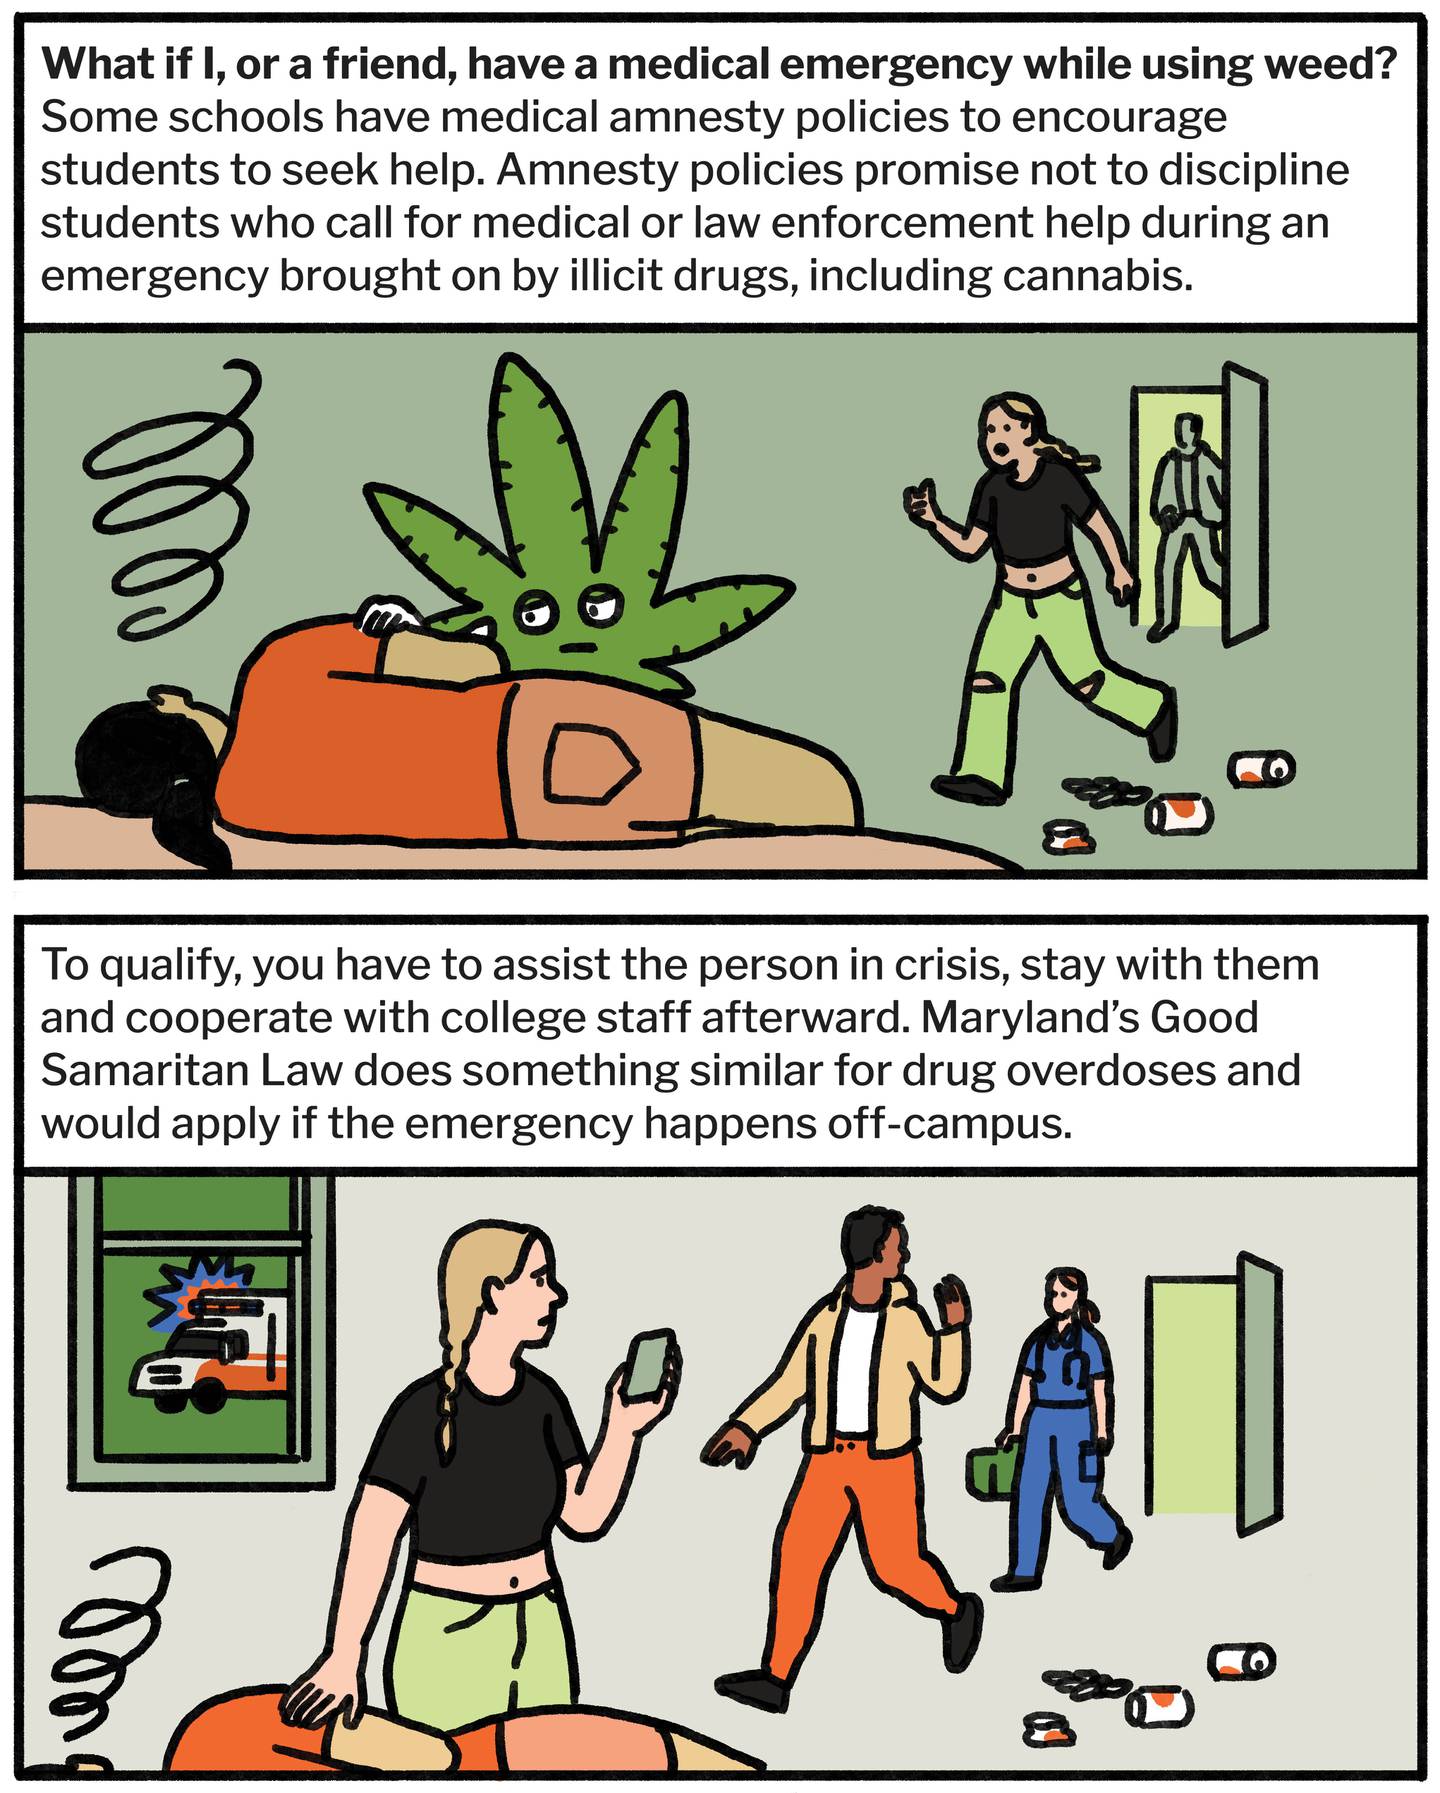 What if I, or a friend, have a medical emergency while using weed? Some schools have medical amnesty policies to encourage students to seek help. Amnesty policies promise not to discipline students who call for medical or law enforcement help during an emergency brought on by illicit drugs, including cannabis. To qualify, you have to assist the person experiencing the emergency, stay with them and cooperate with college staff afterward. Maryland’s Good Samaritan Law does something similar for drug overdose situations and would apply if the emergency happens off-campus.